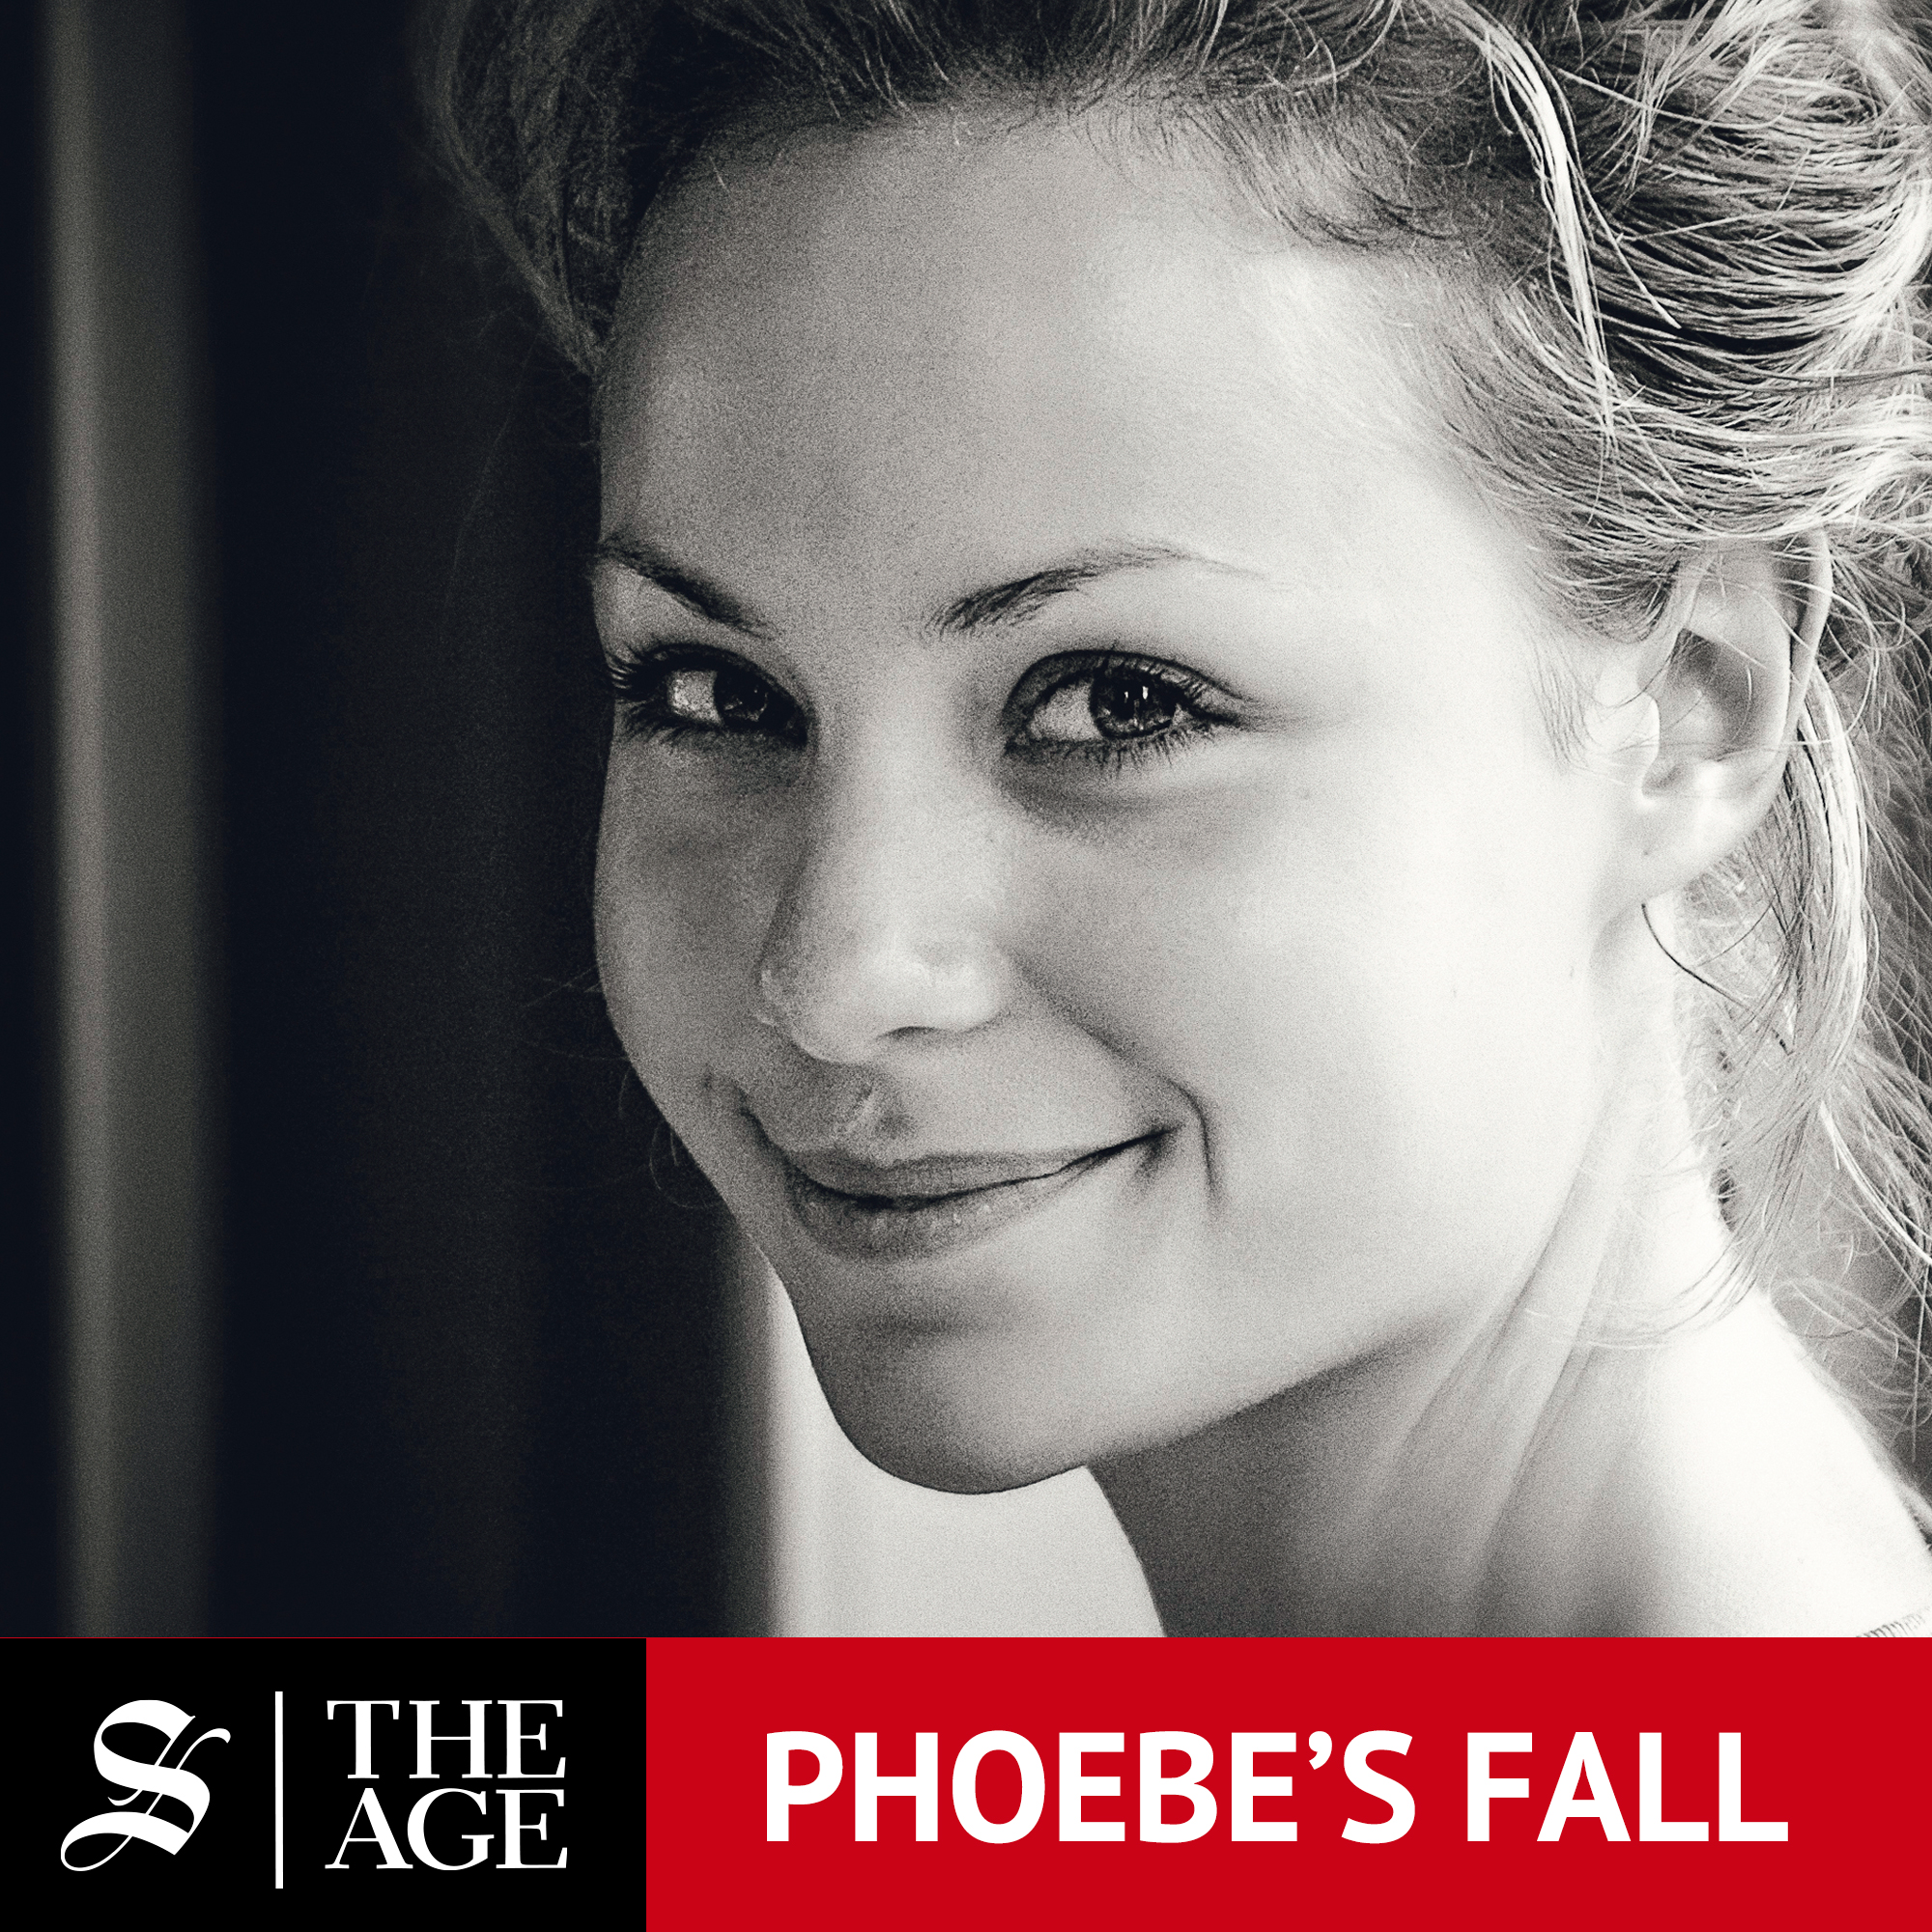 No time of death for Phoebe